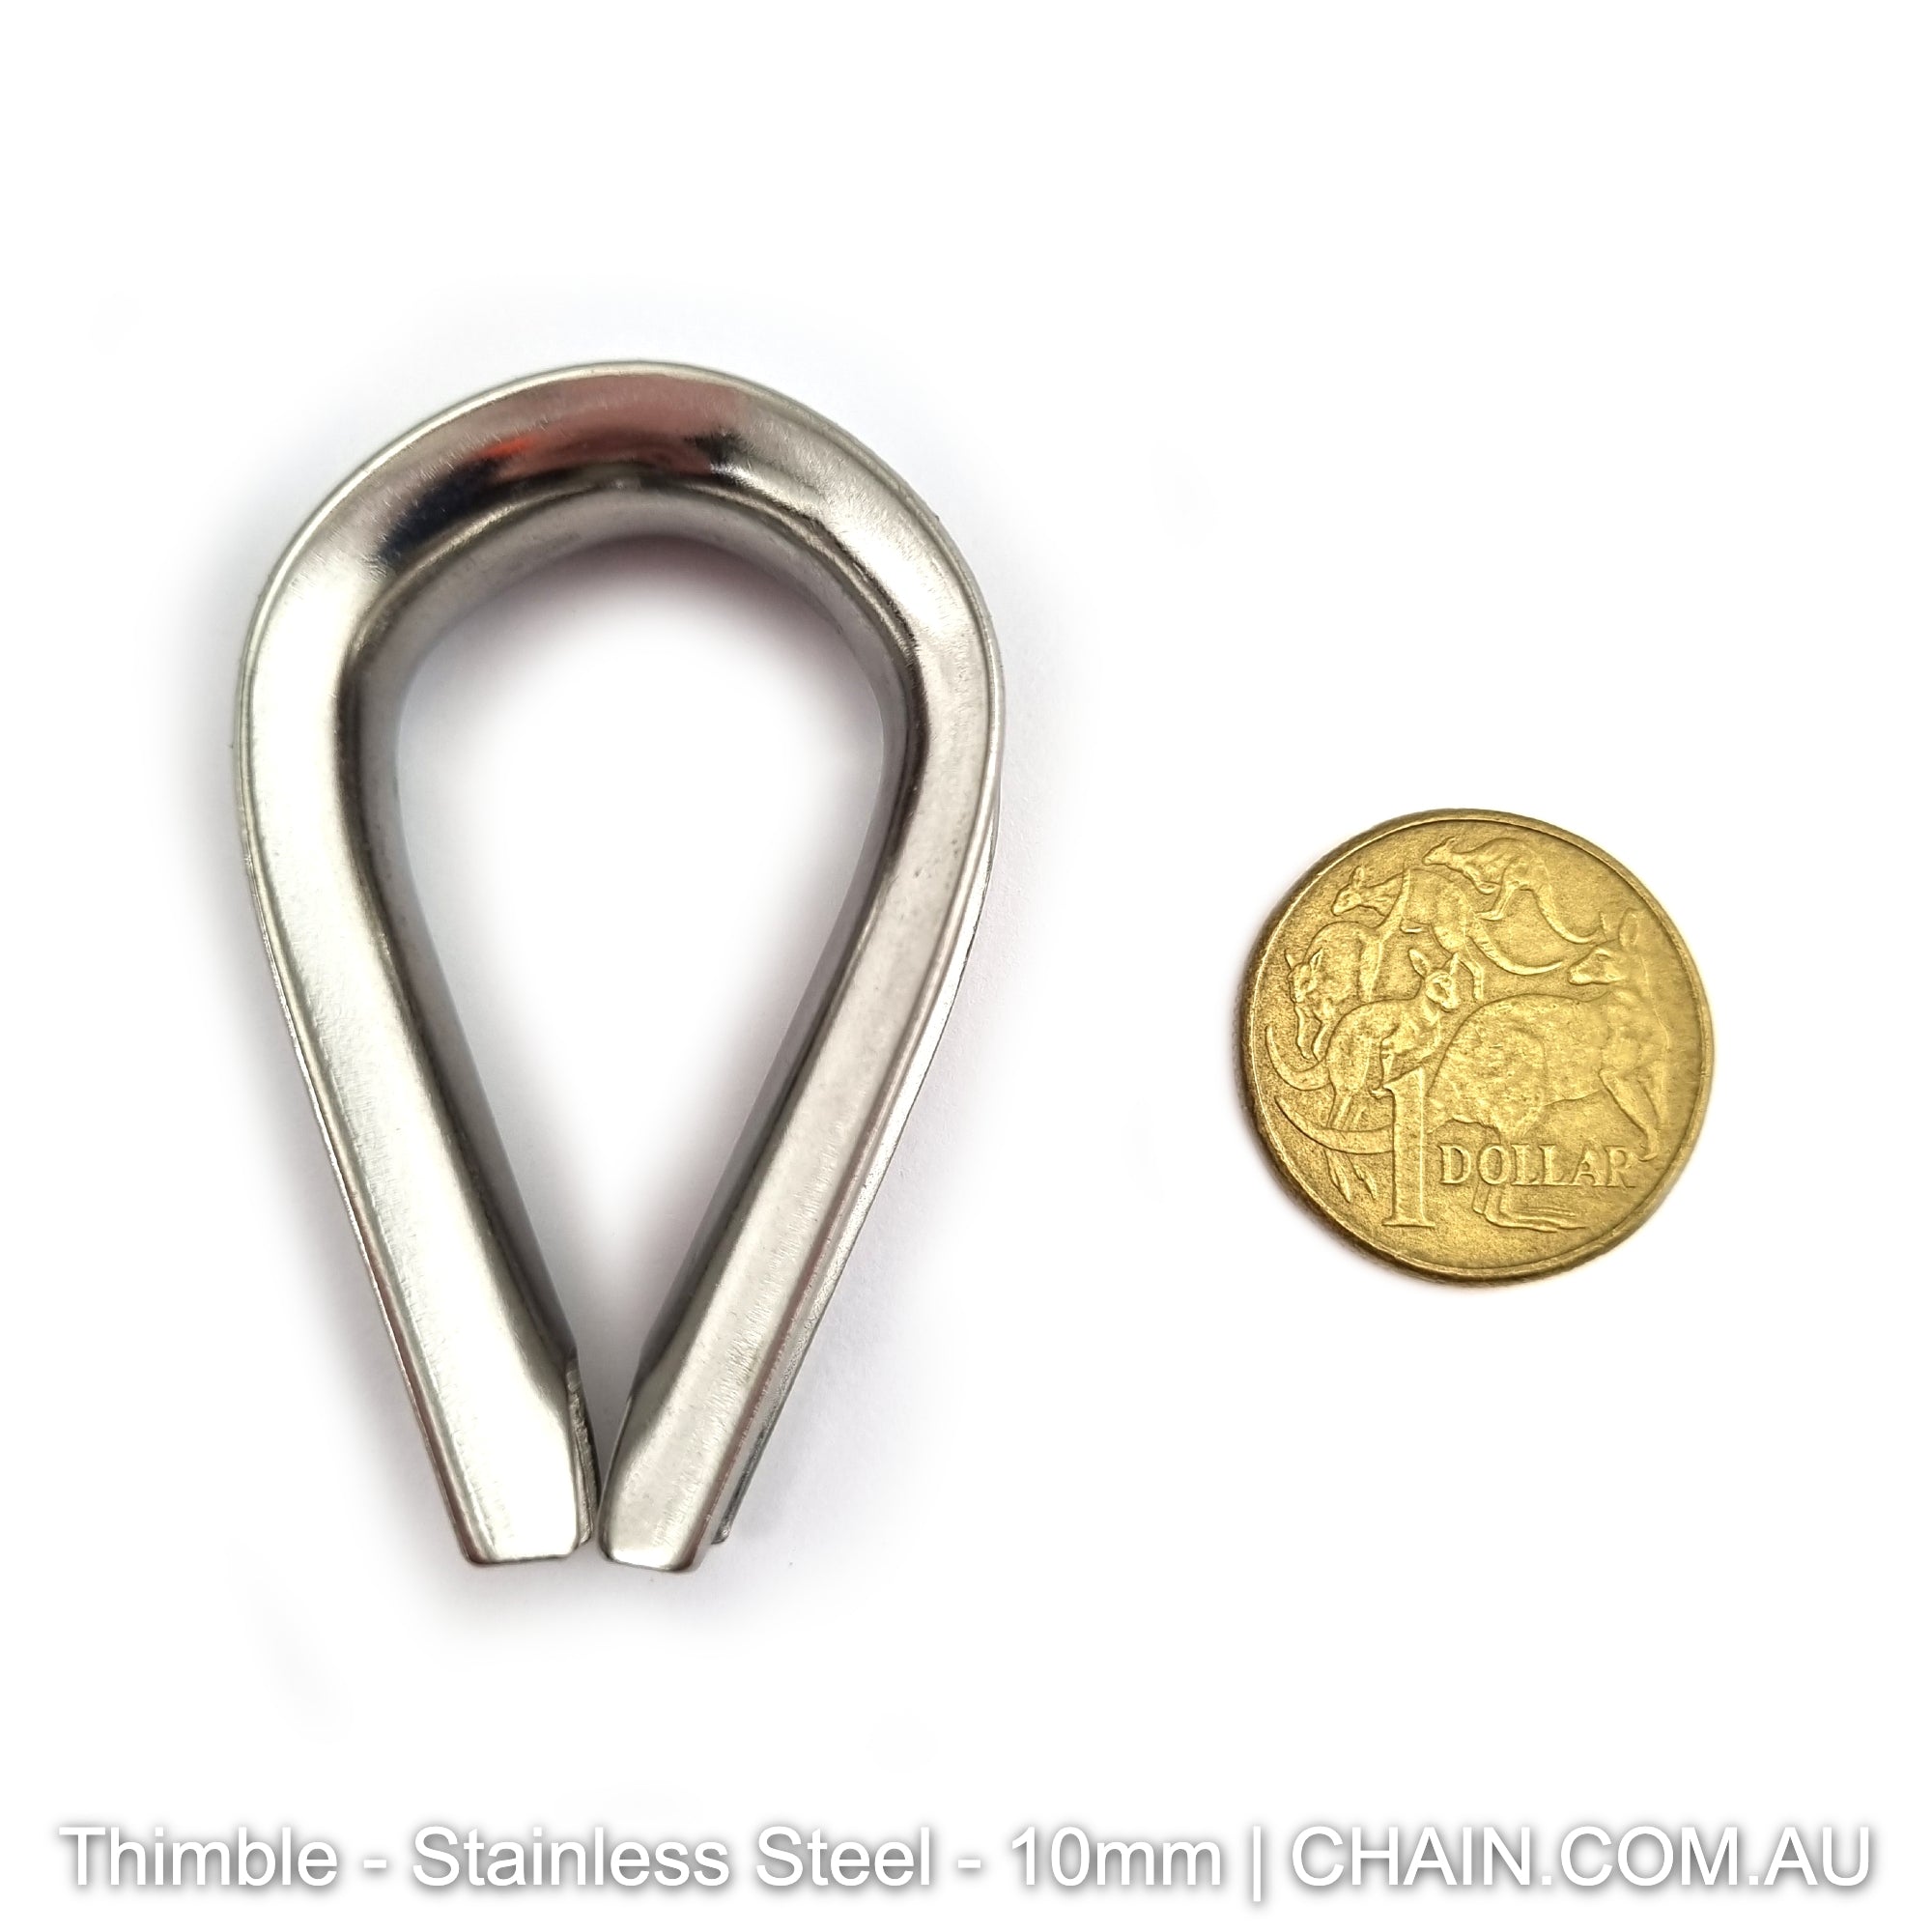 Stainless steel thimble, size 10mm in type 316 marine grade stainless steel. Shop hardware online. Australia wide shipping + Melbourne click & collect.